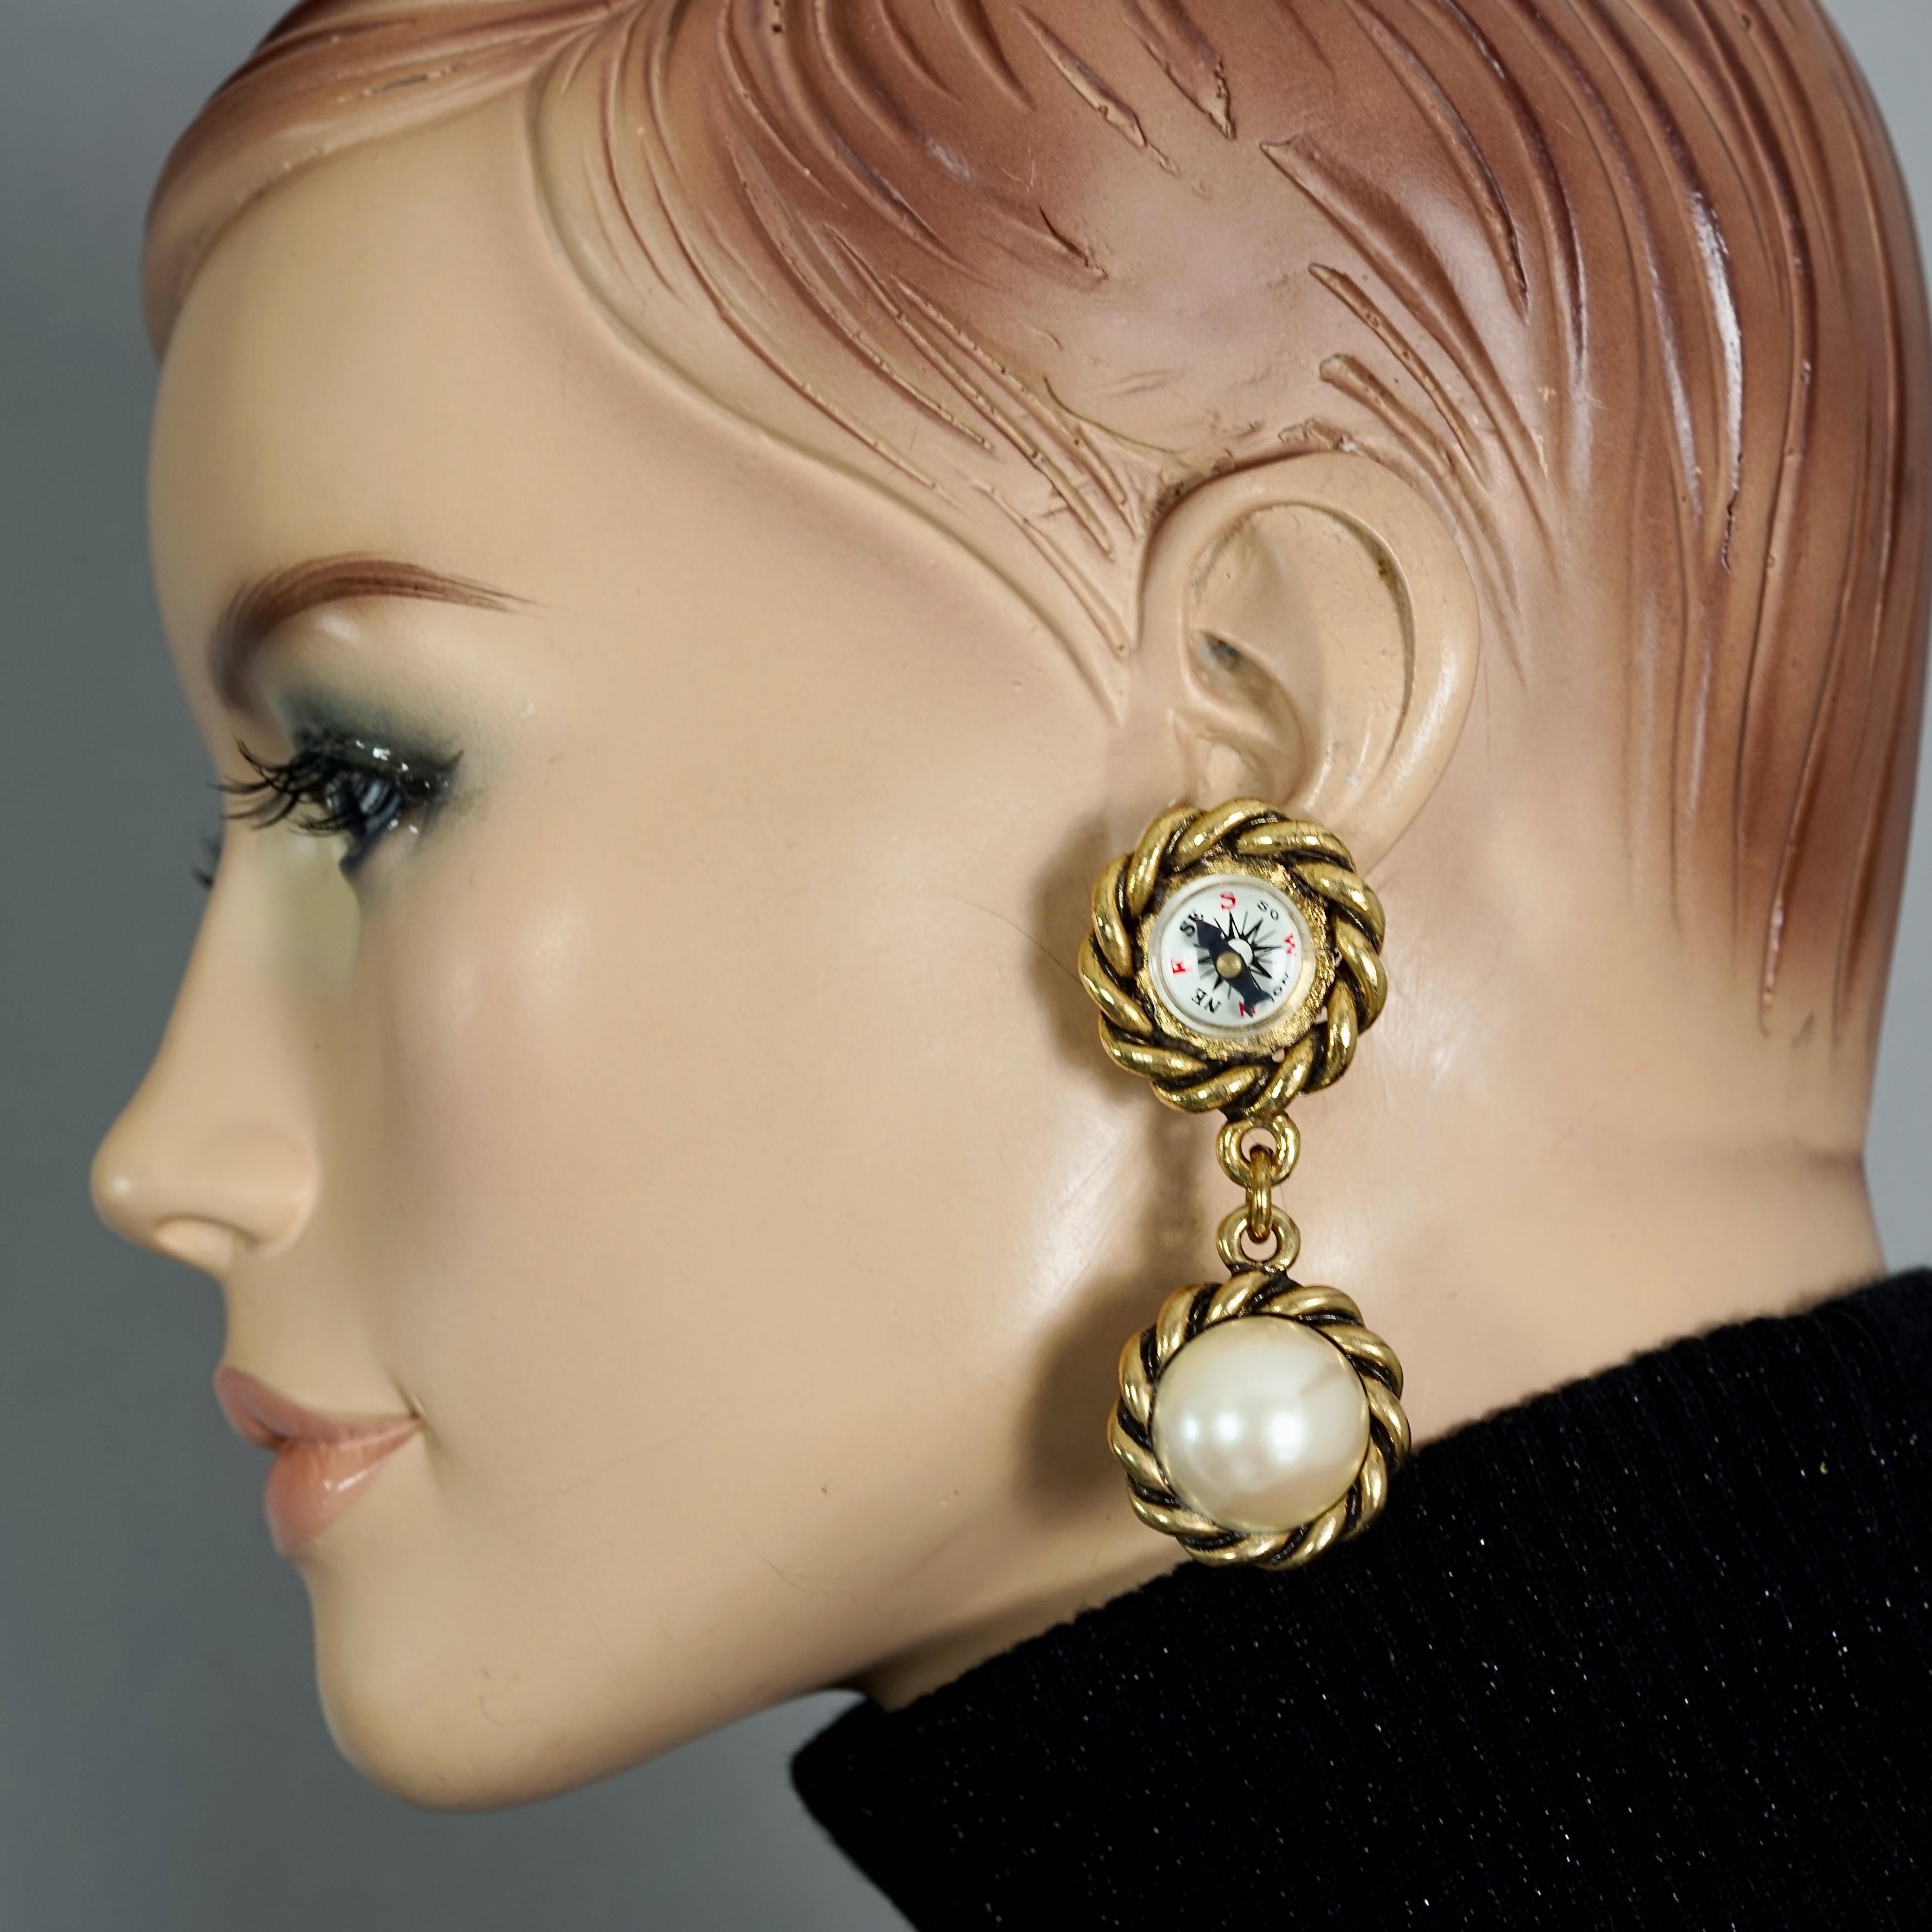 Vintage MOSCHINO Compass Pearl Novelty Dangling Earrings

Measurements:
Height: 2.75 inches (7 cm)
Width: 1.10 inches (2.8 cm)
Weight per Earring: 22 grams

Features:
- 100% Authentic MOSCHINO.
- Compass novelty dangling earrings.
- Clip back